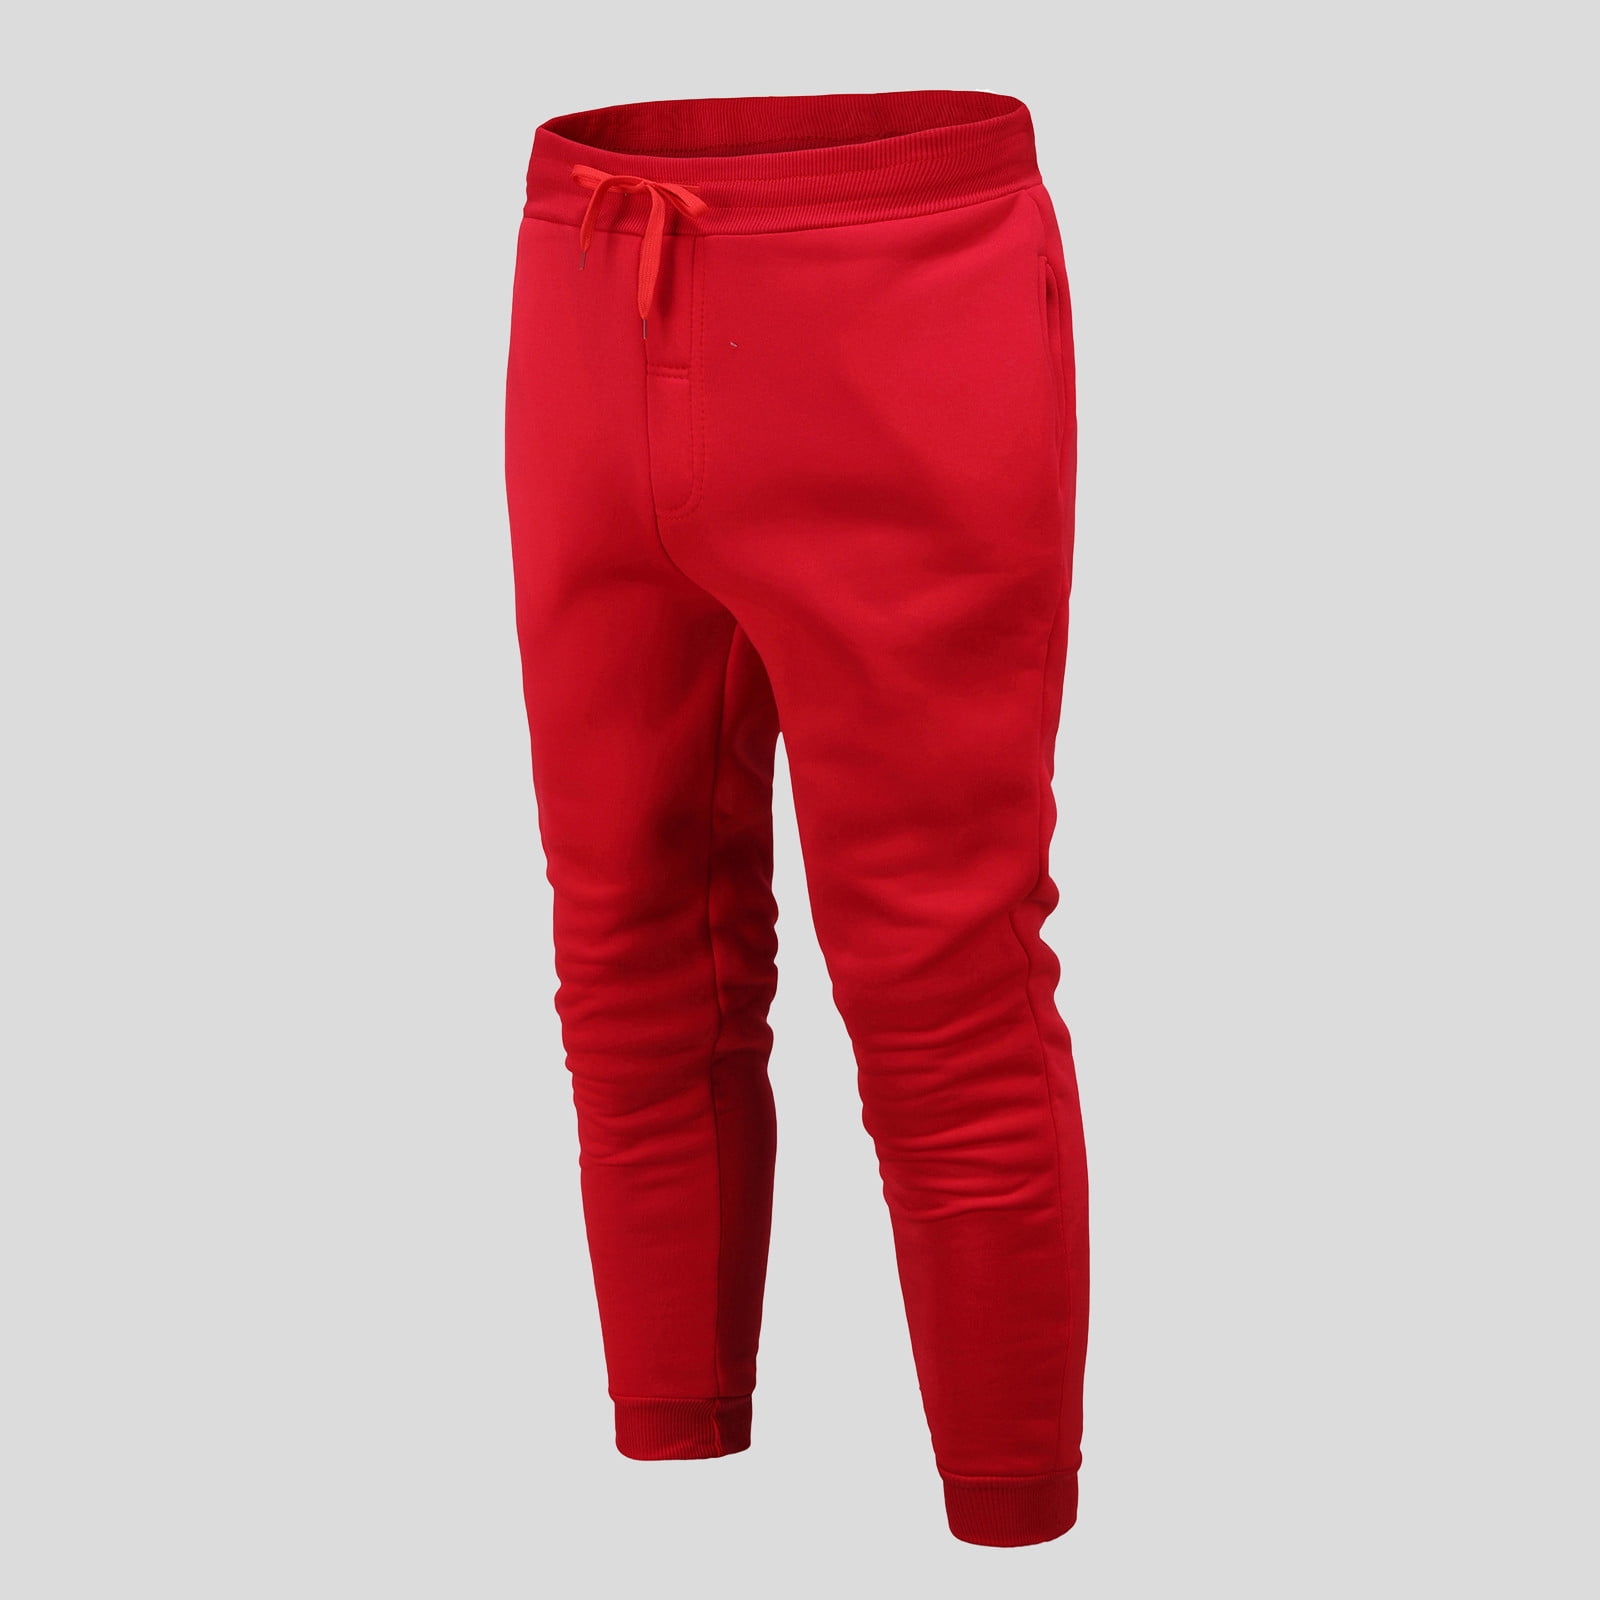 Red Sweatpants For Men Mens Autumn And Winter High Street Fashion Leisure  Loose Sports Running Solid Color Lace Up Pants Sweater Pants Trousers